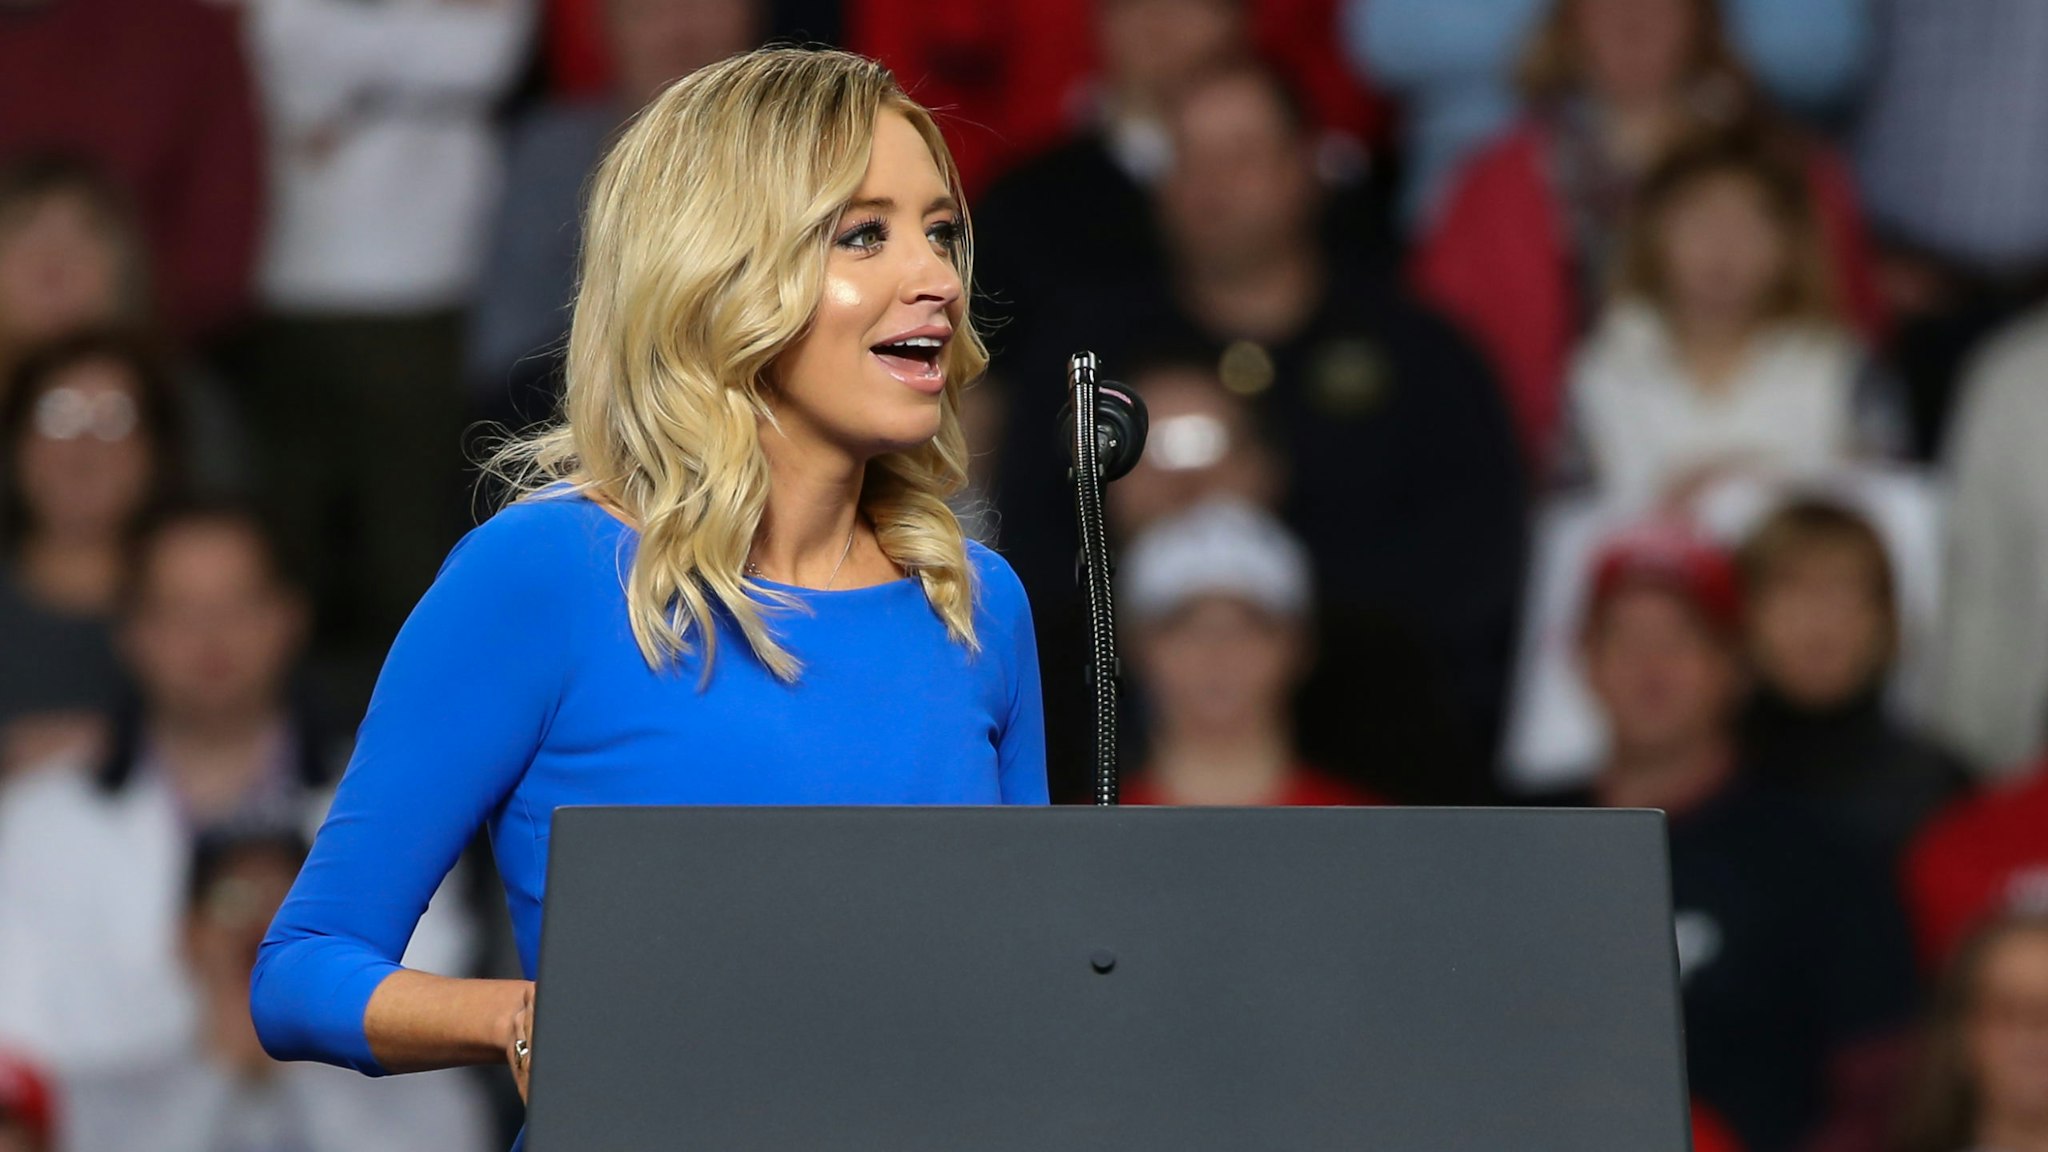 OLEDO, OH - JANUARY 09: Kayleigh McEnany, national press secretary for the Donald Trump 2020 presidential campaign, speaks at a "Keep America Great" campaign rally on January 9, 2020 at the Huntington Center in Toledo, Ohio. (Photo by Scott W. Grau/Icon Sportswire via Getty Images)